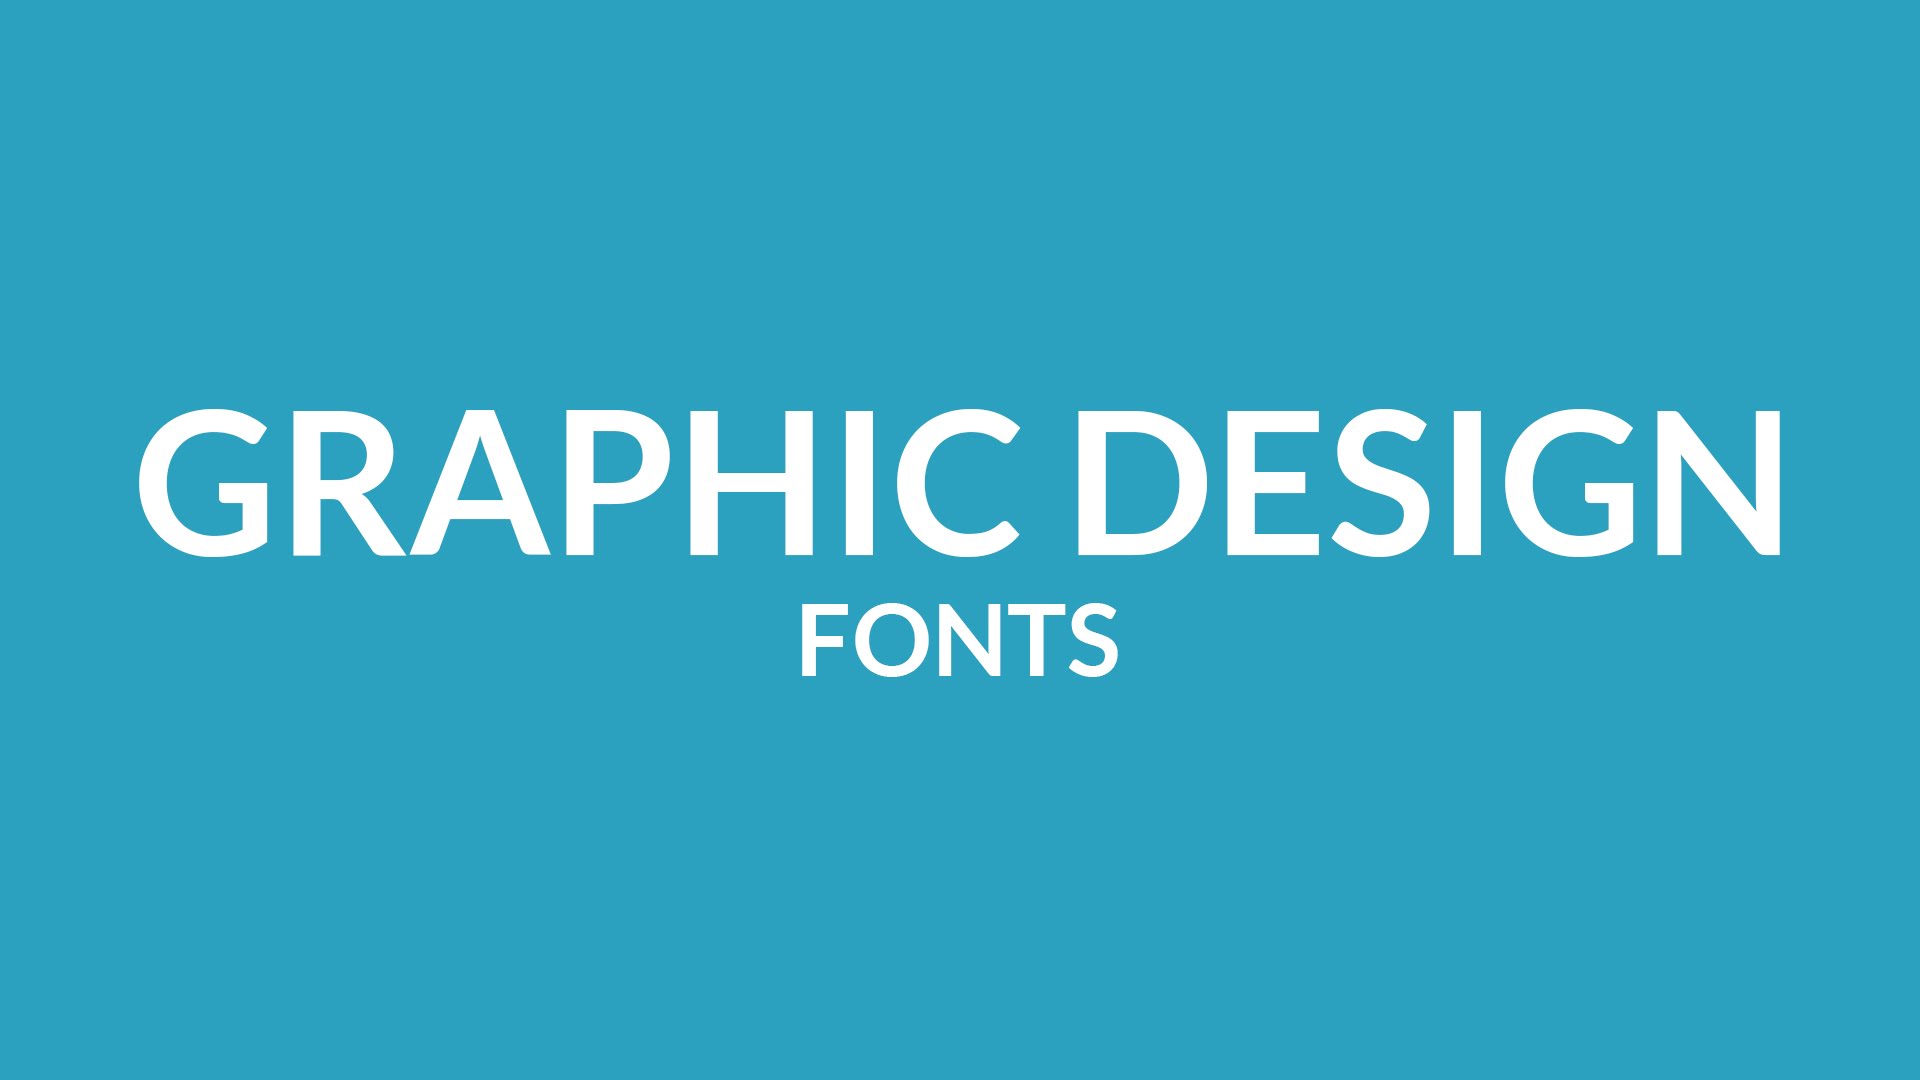 where to find free fonts and graphics